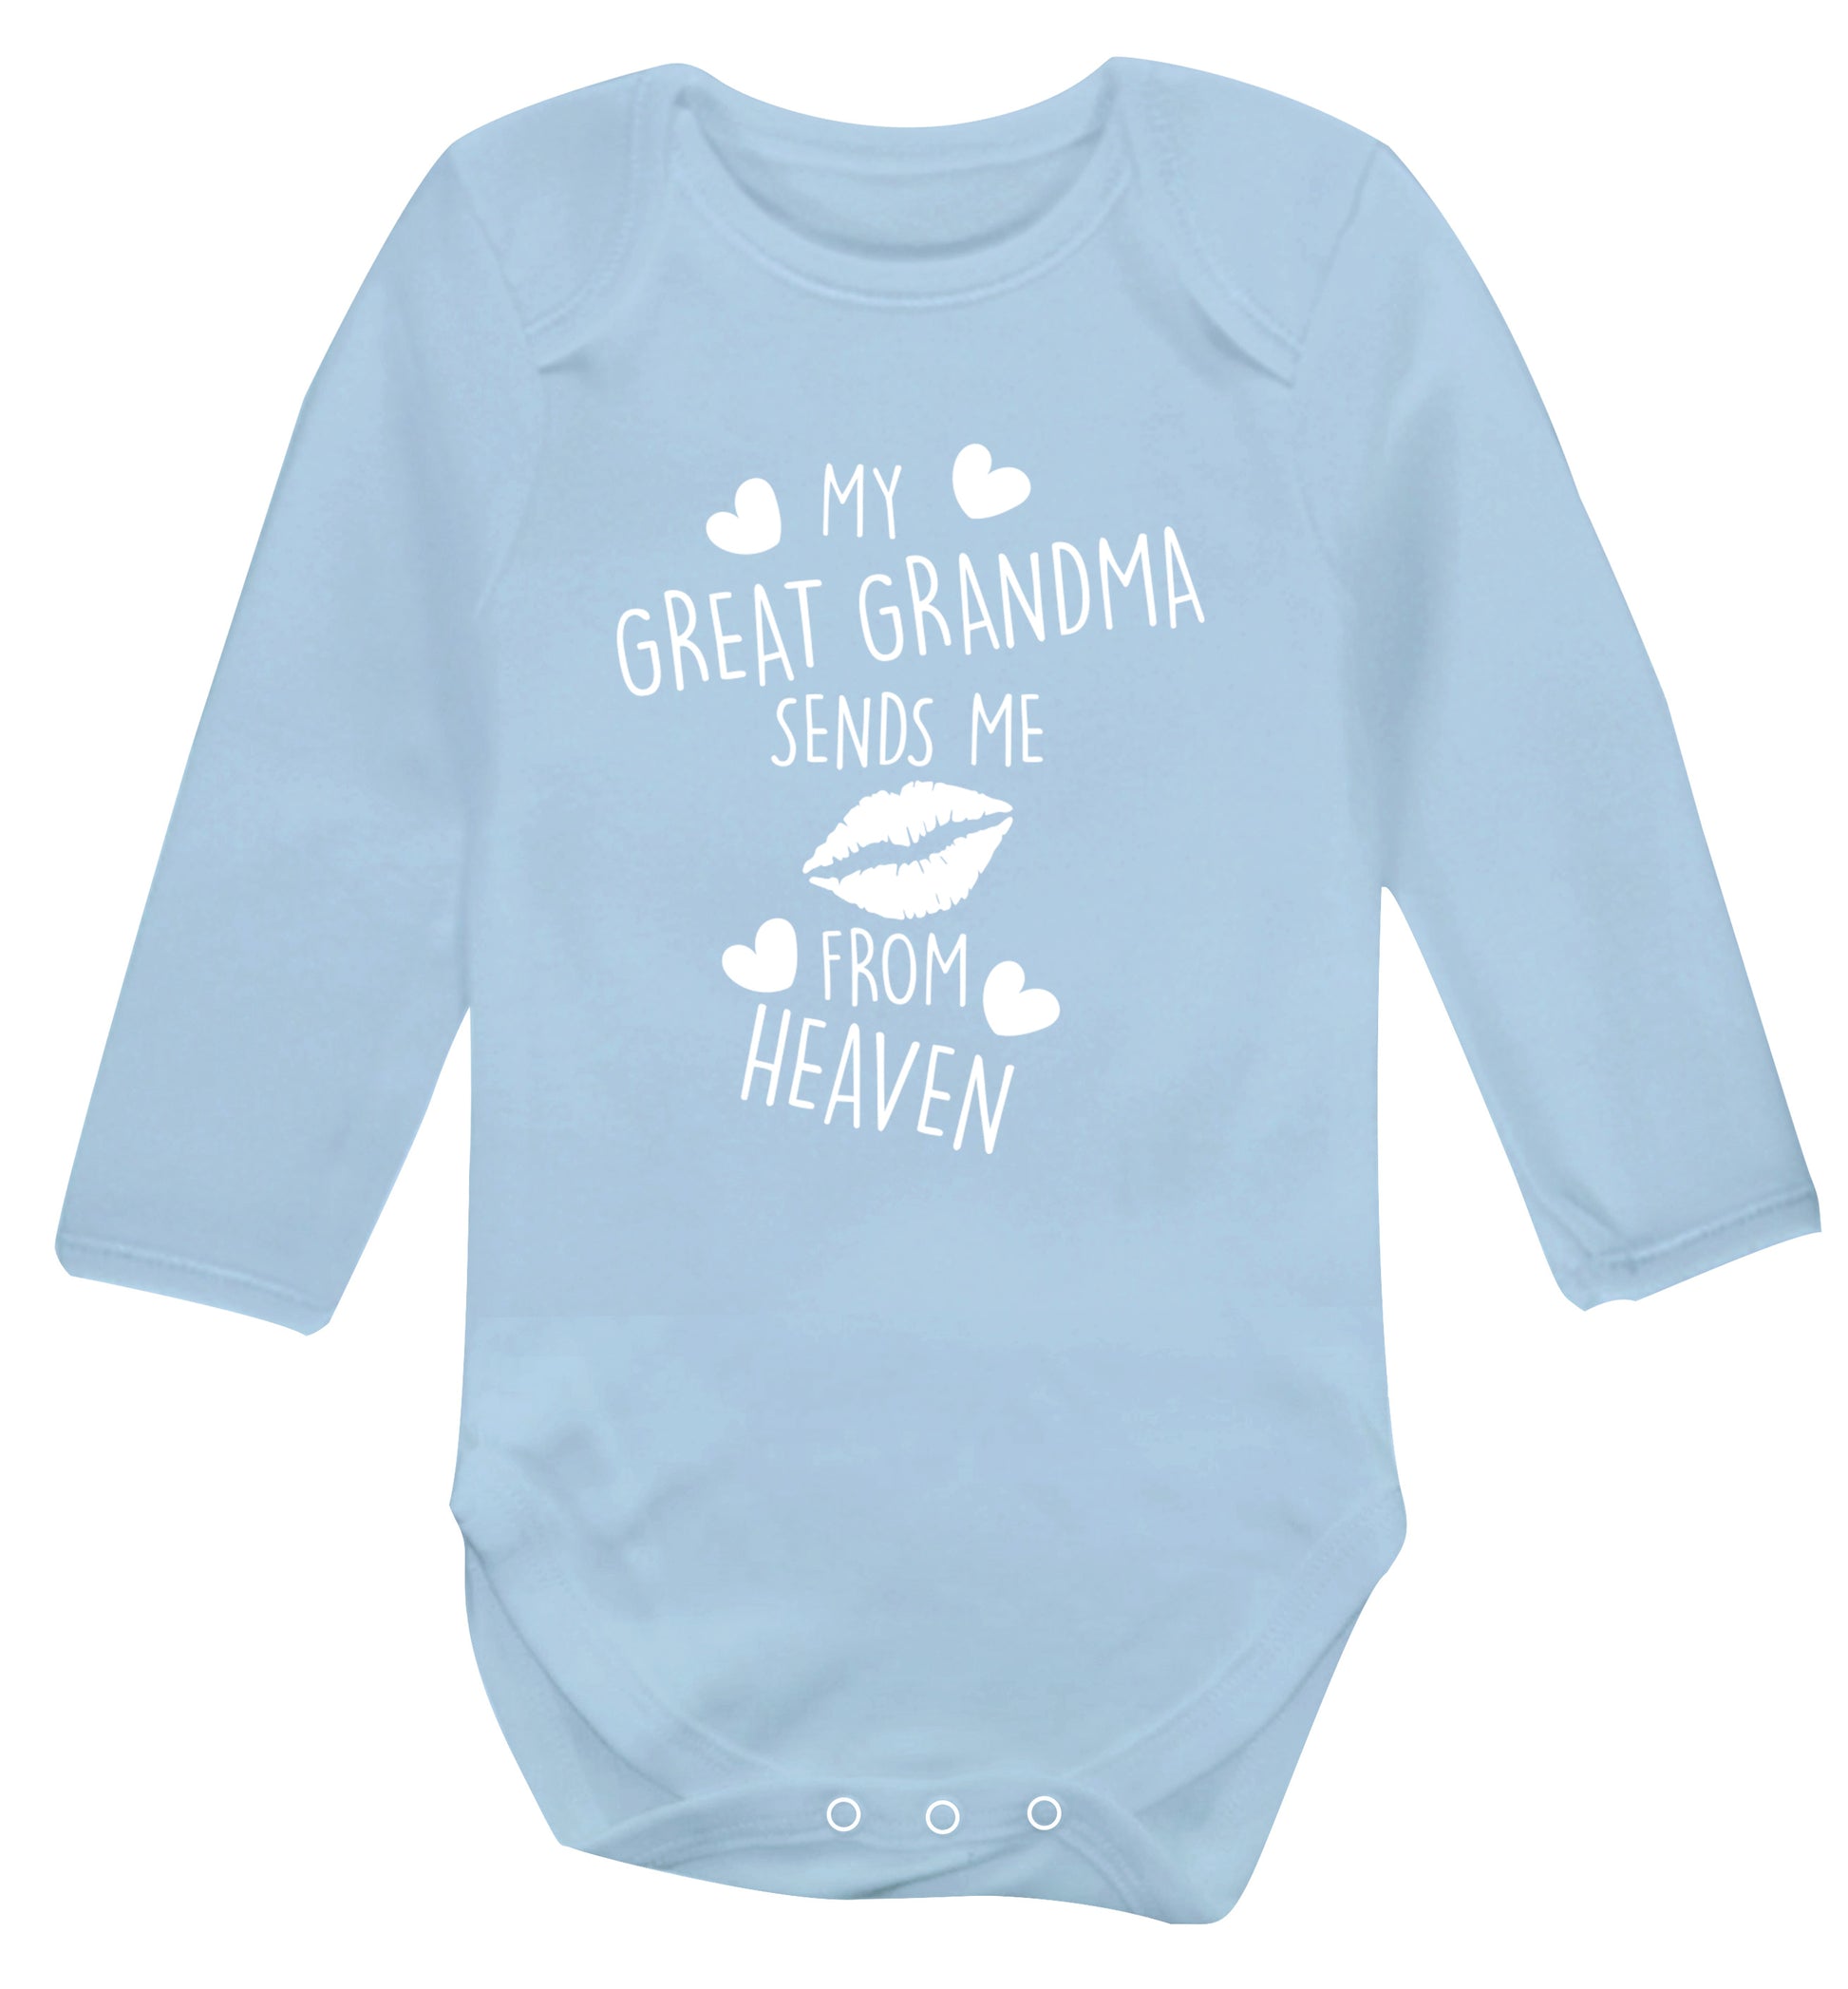 My great grandma sends me kisses from heaven Baby Vest long sleeved pale blue 6-12 months